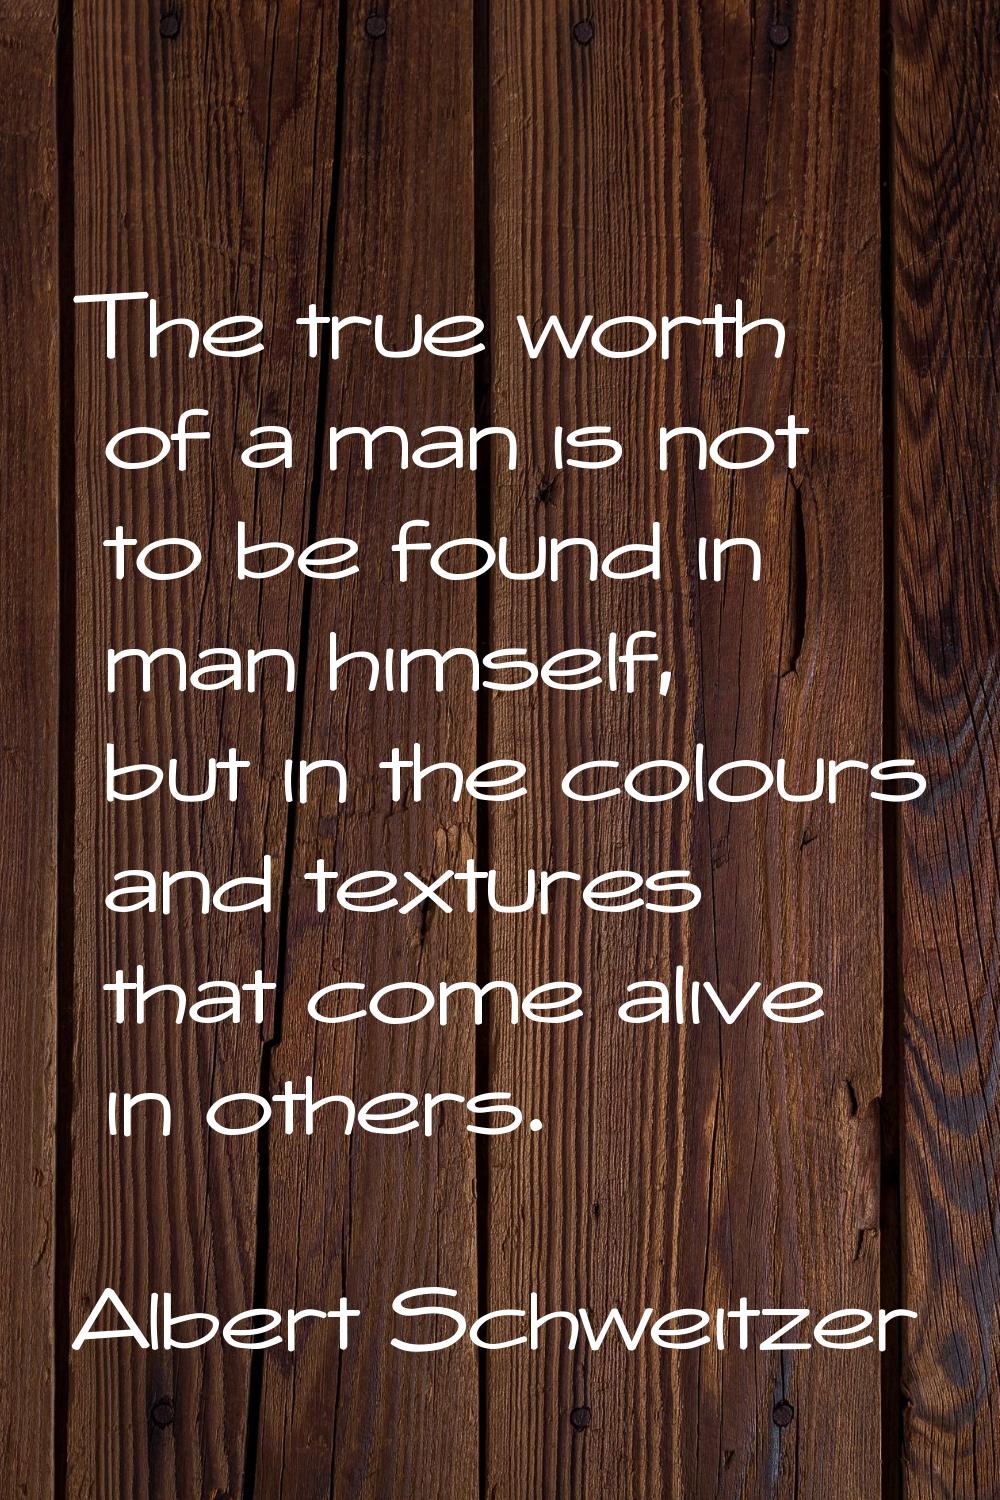 The true worth of a man is not to be found in man himself, but in the colours and textures that com